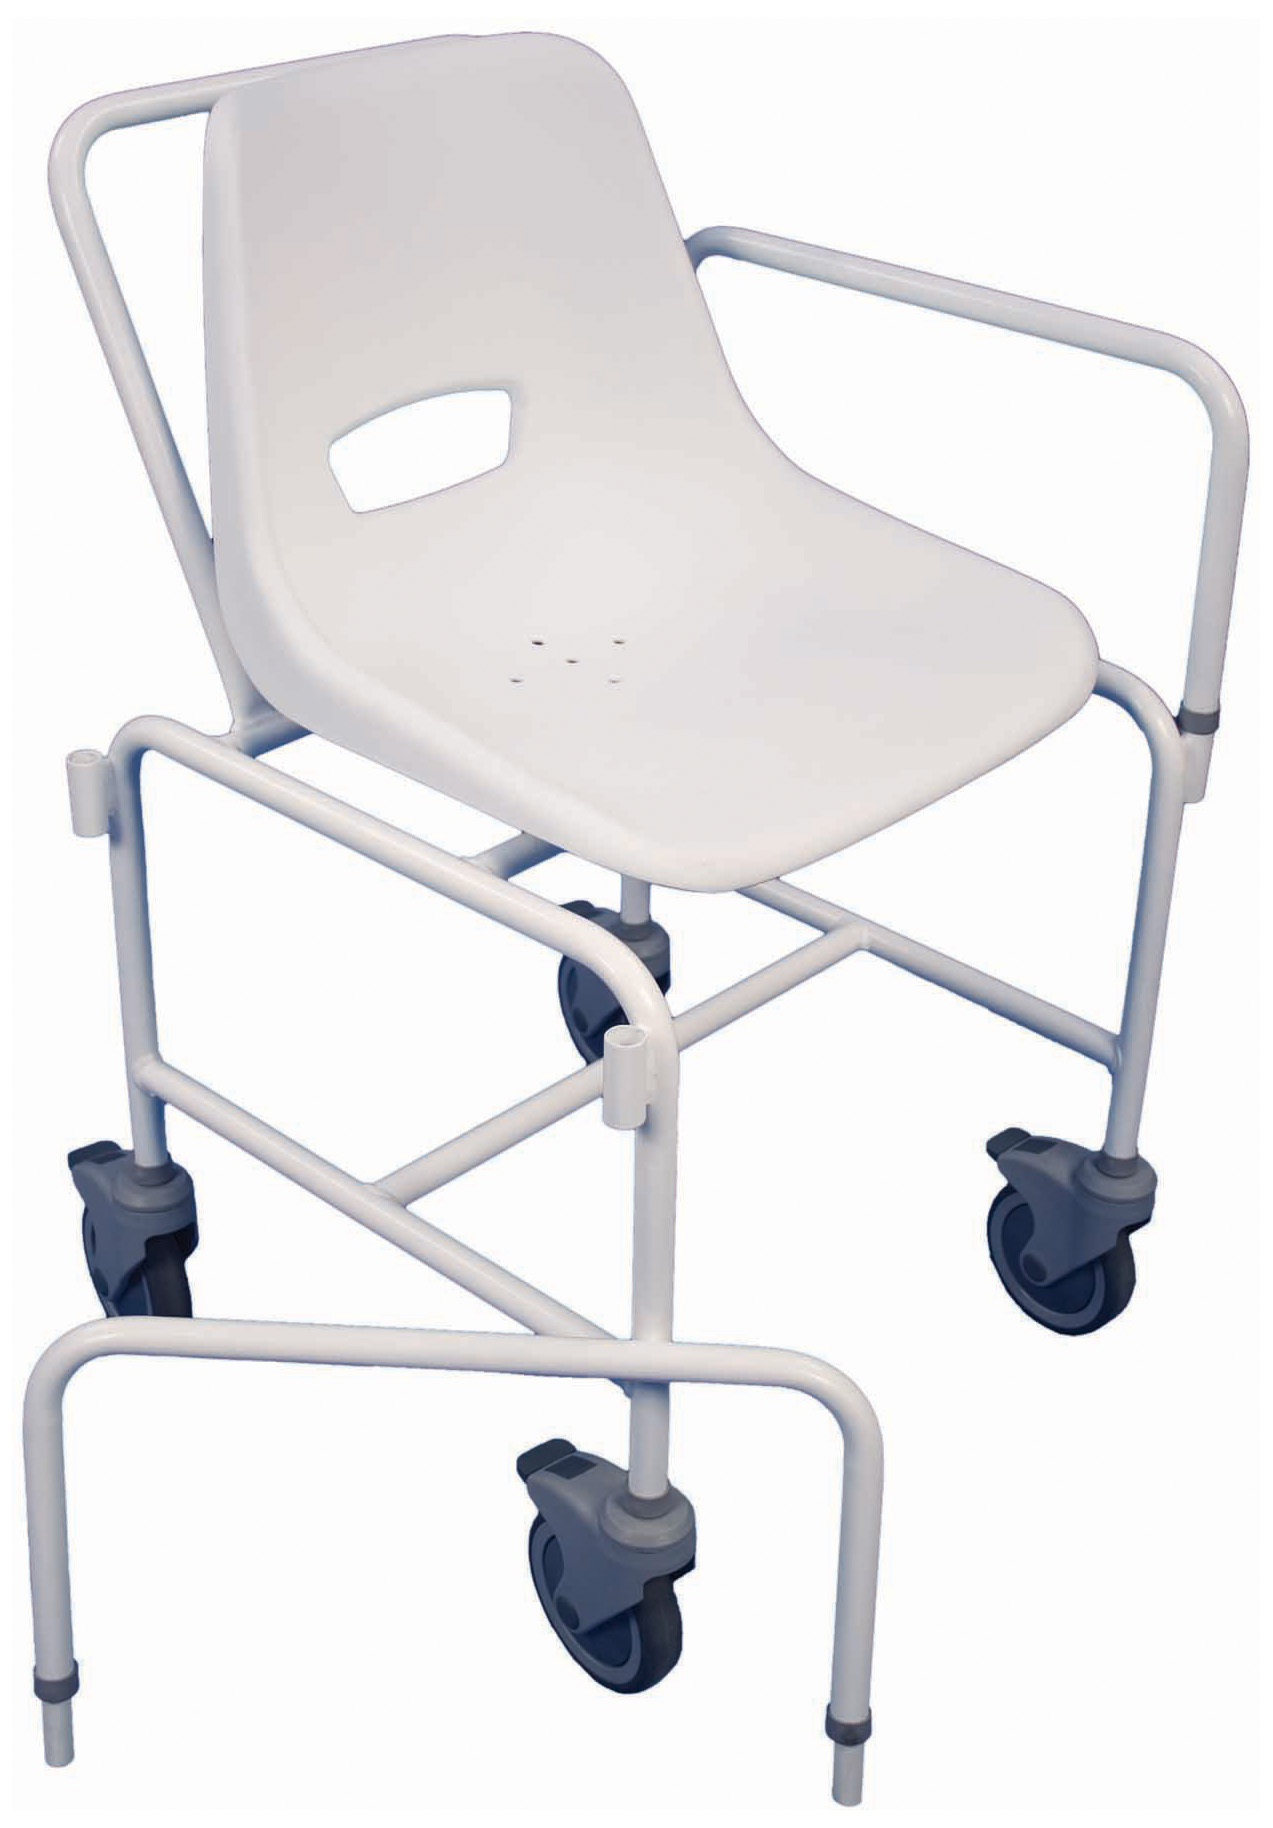 Charing Attendant Propelled Shower Chair 1